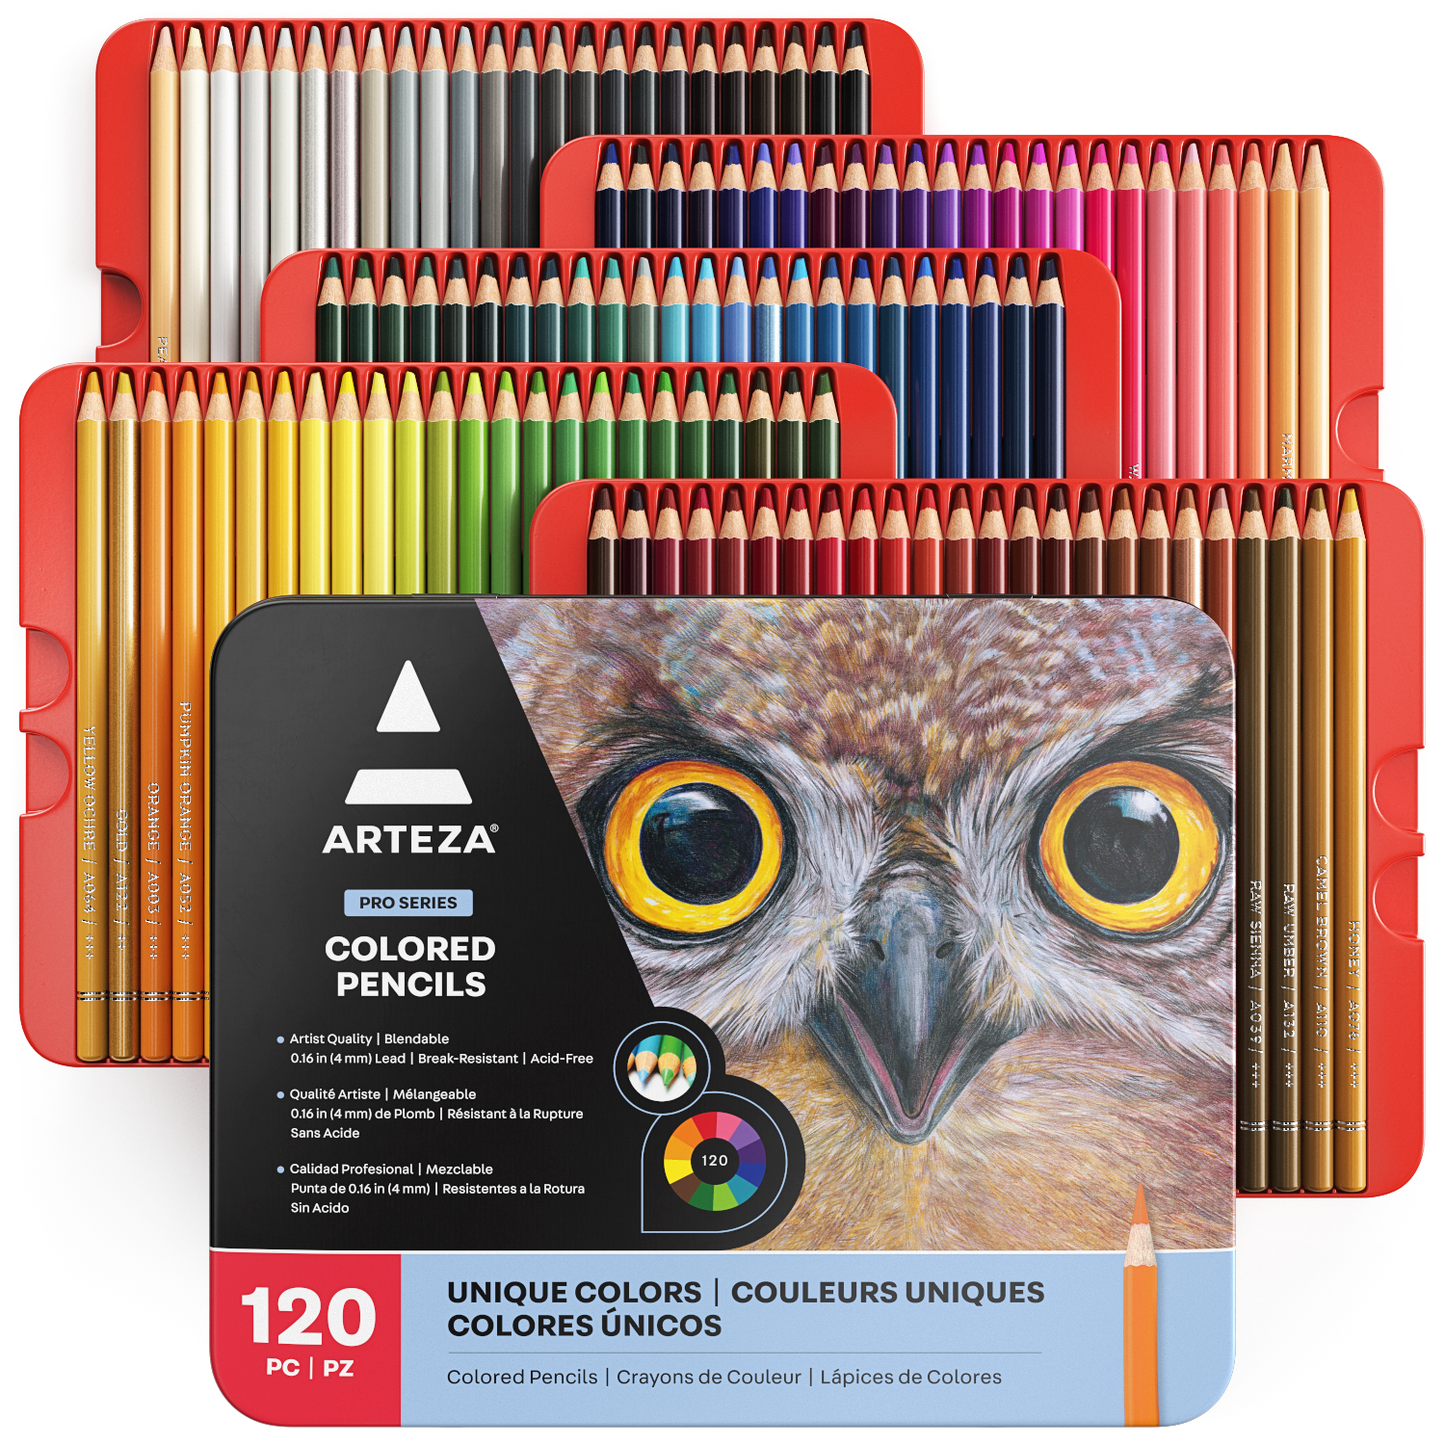 120 Brutfuner Colored Pencils Pre-made Original Swatch Charts in